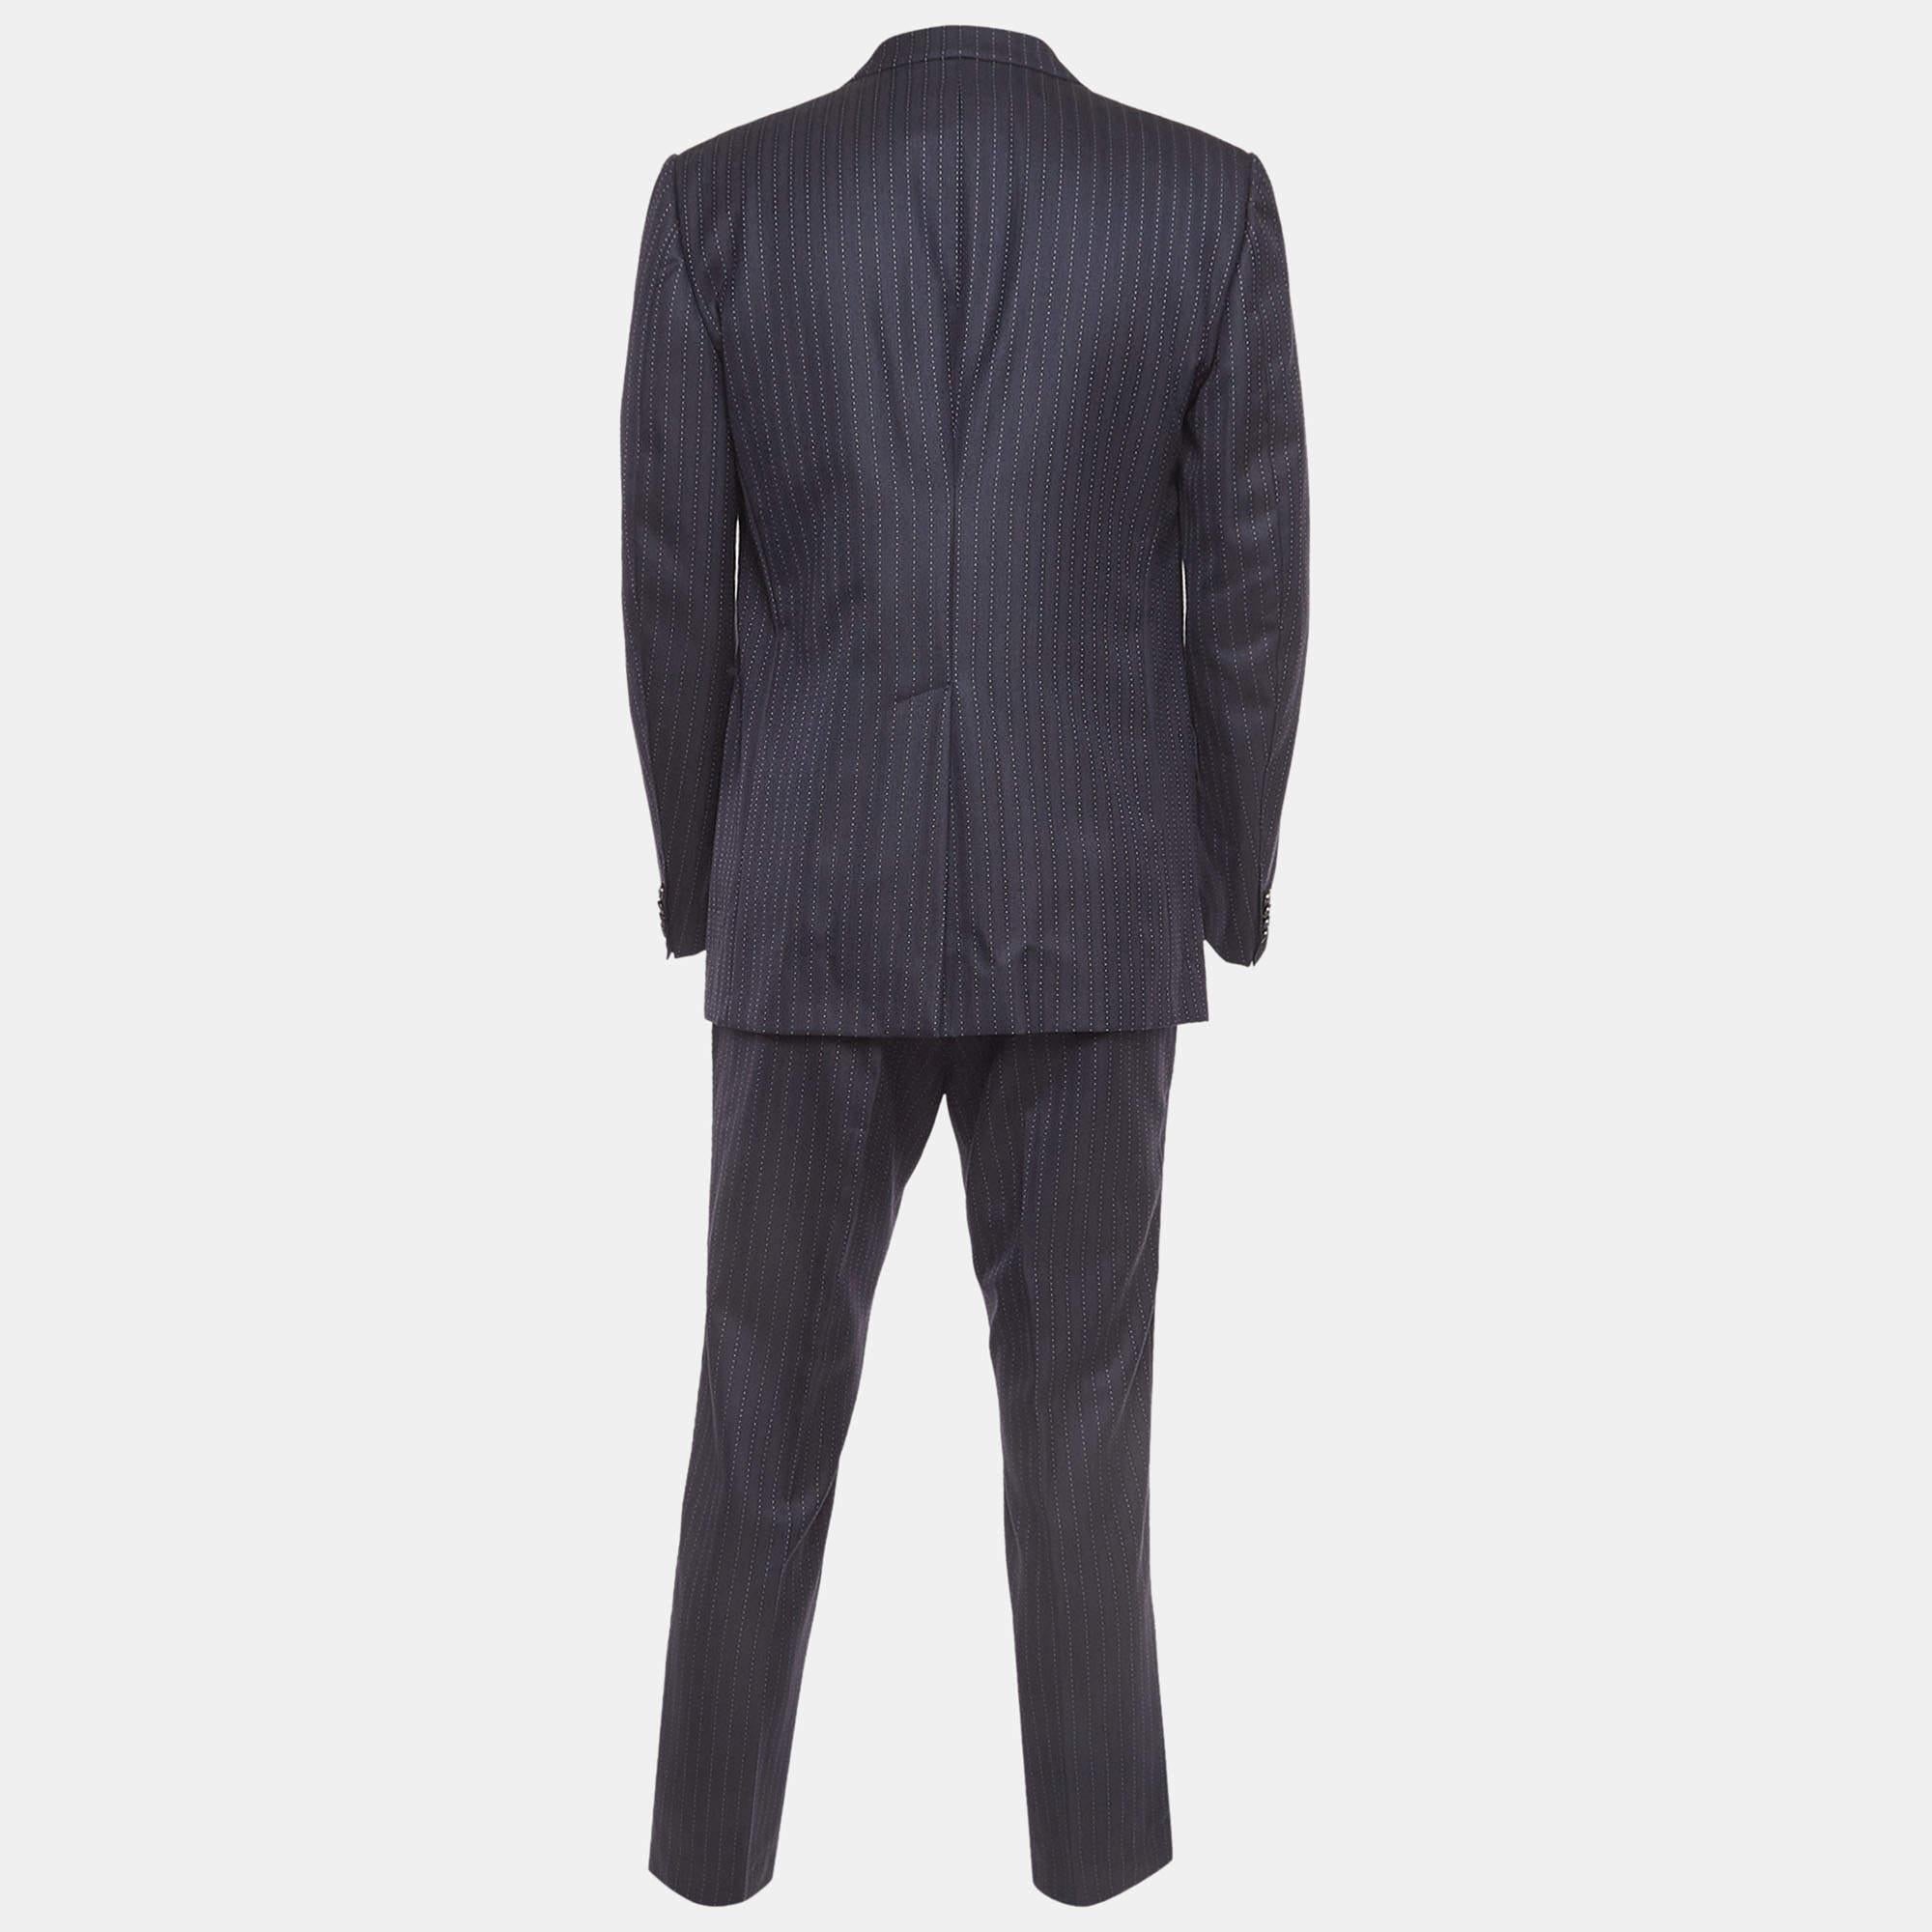 Crafted from luxurious navy blue pinstripe wool, this Gucci single-breasted suit exudes timeless elegance. Tailored to perfection, it features impeccable detailing and a sleek silhouette, embodying sophistication and refinement. Elevate your style